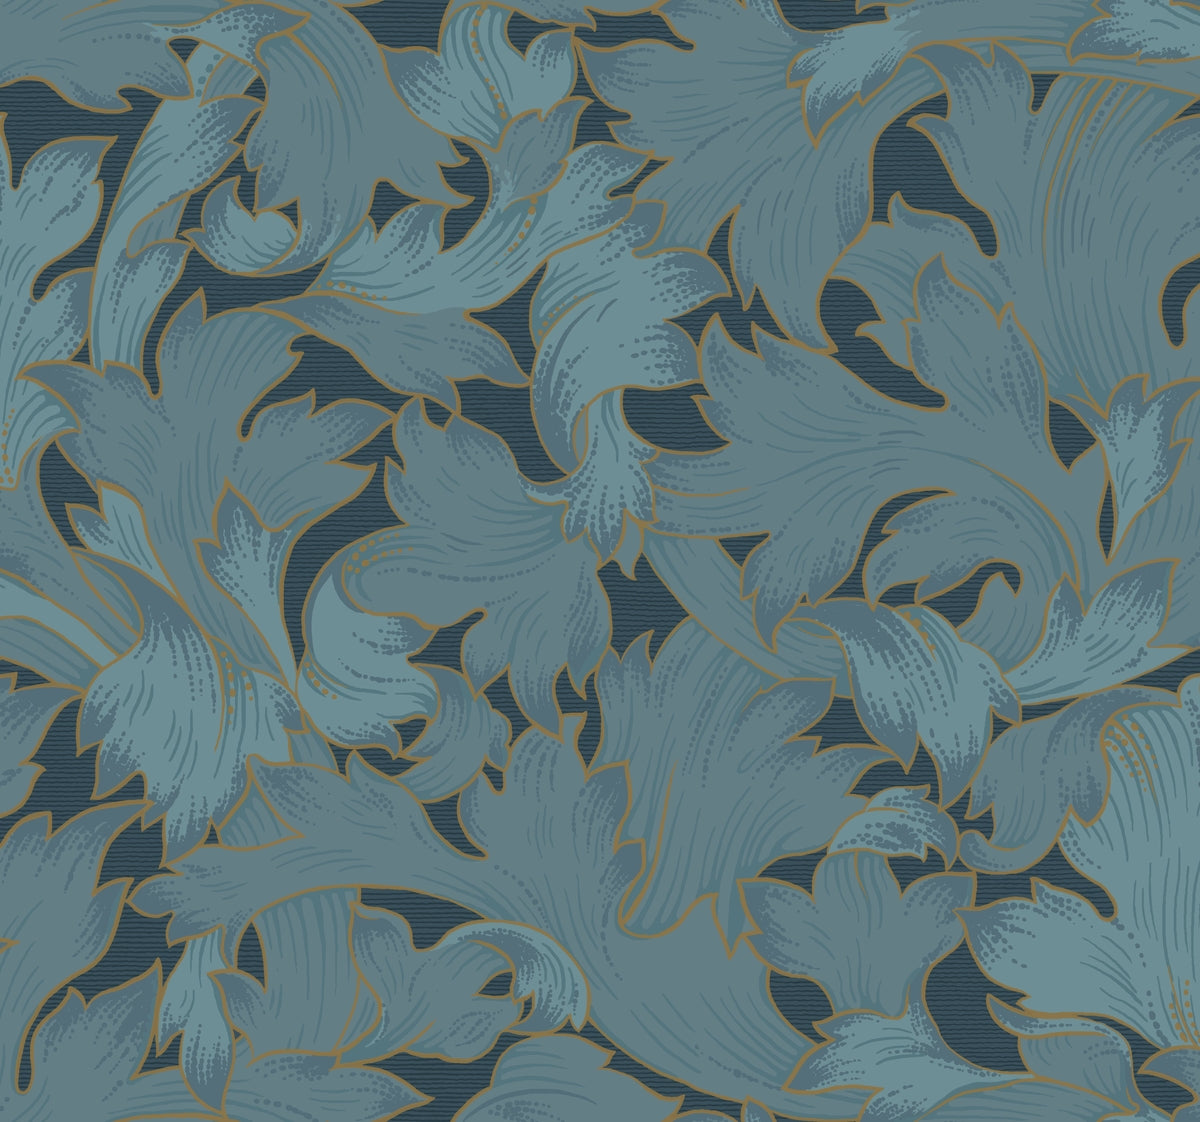 Modern Heritage Acanthus Toss Wallpaper - SAMPLE ONLY